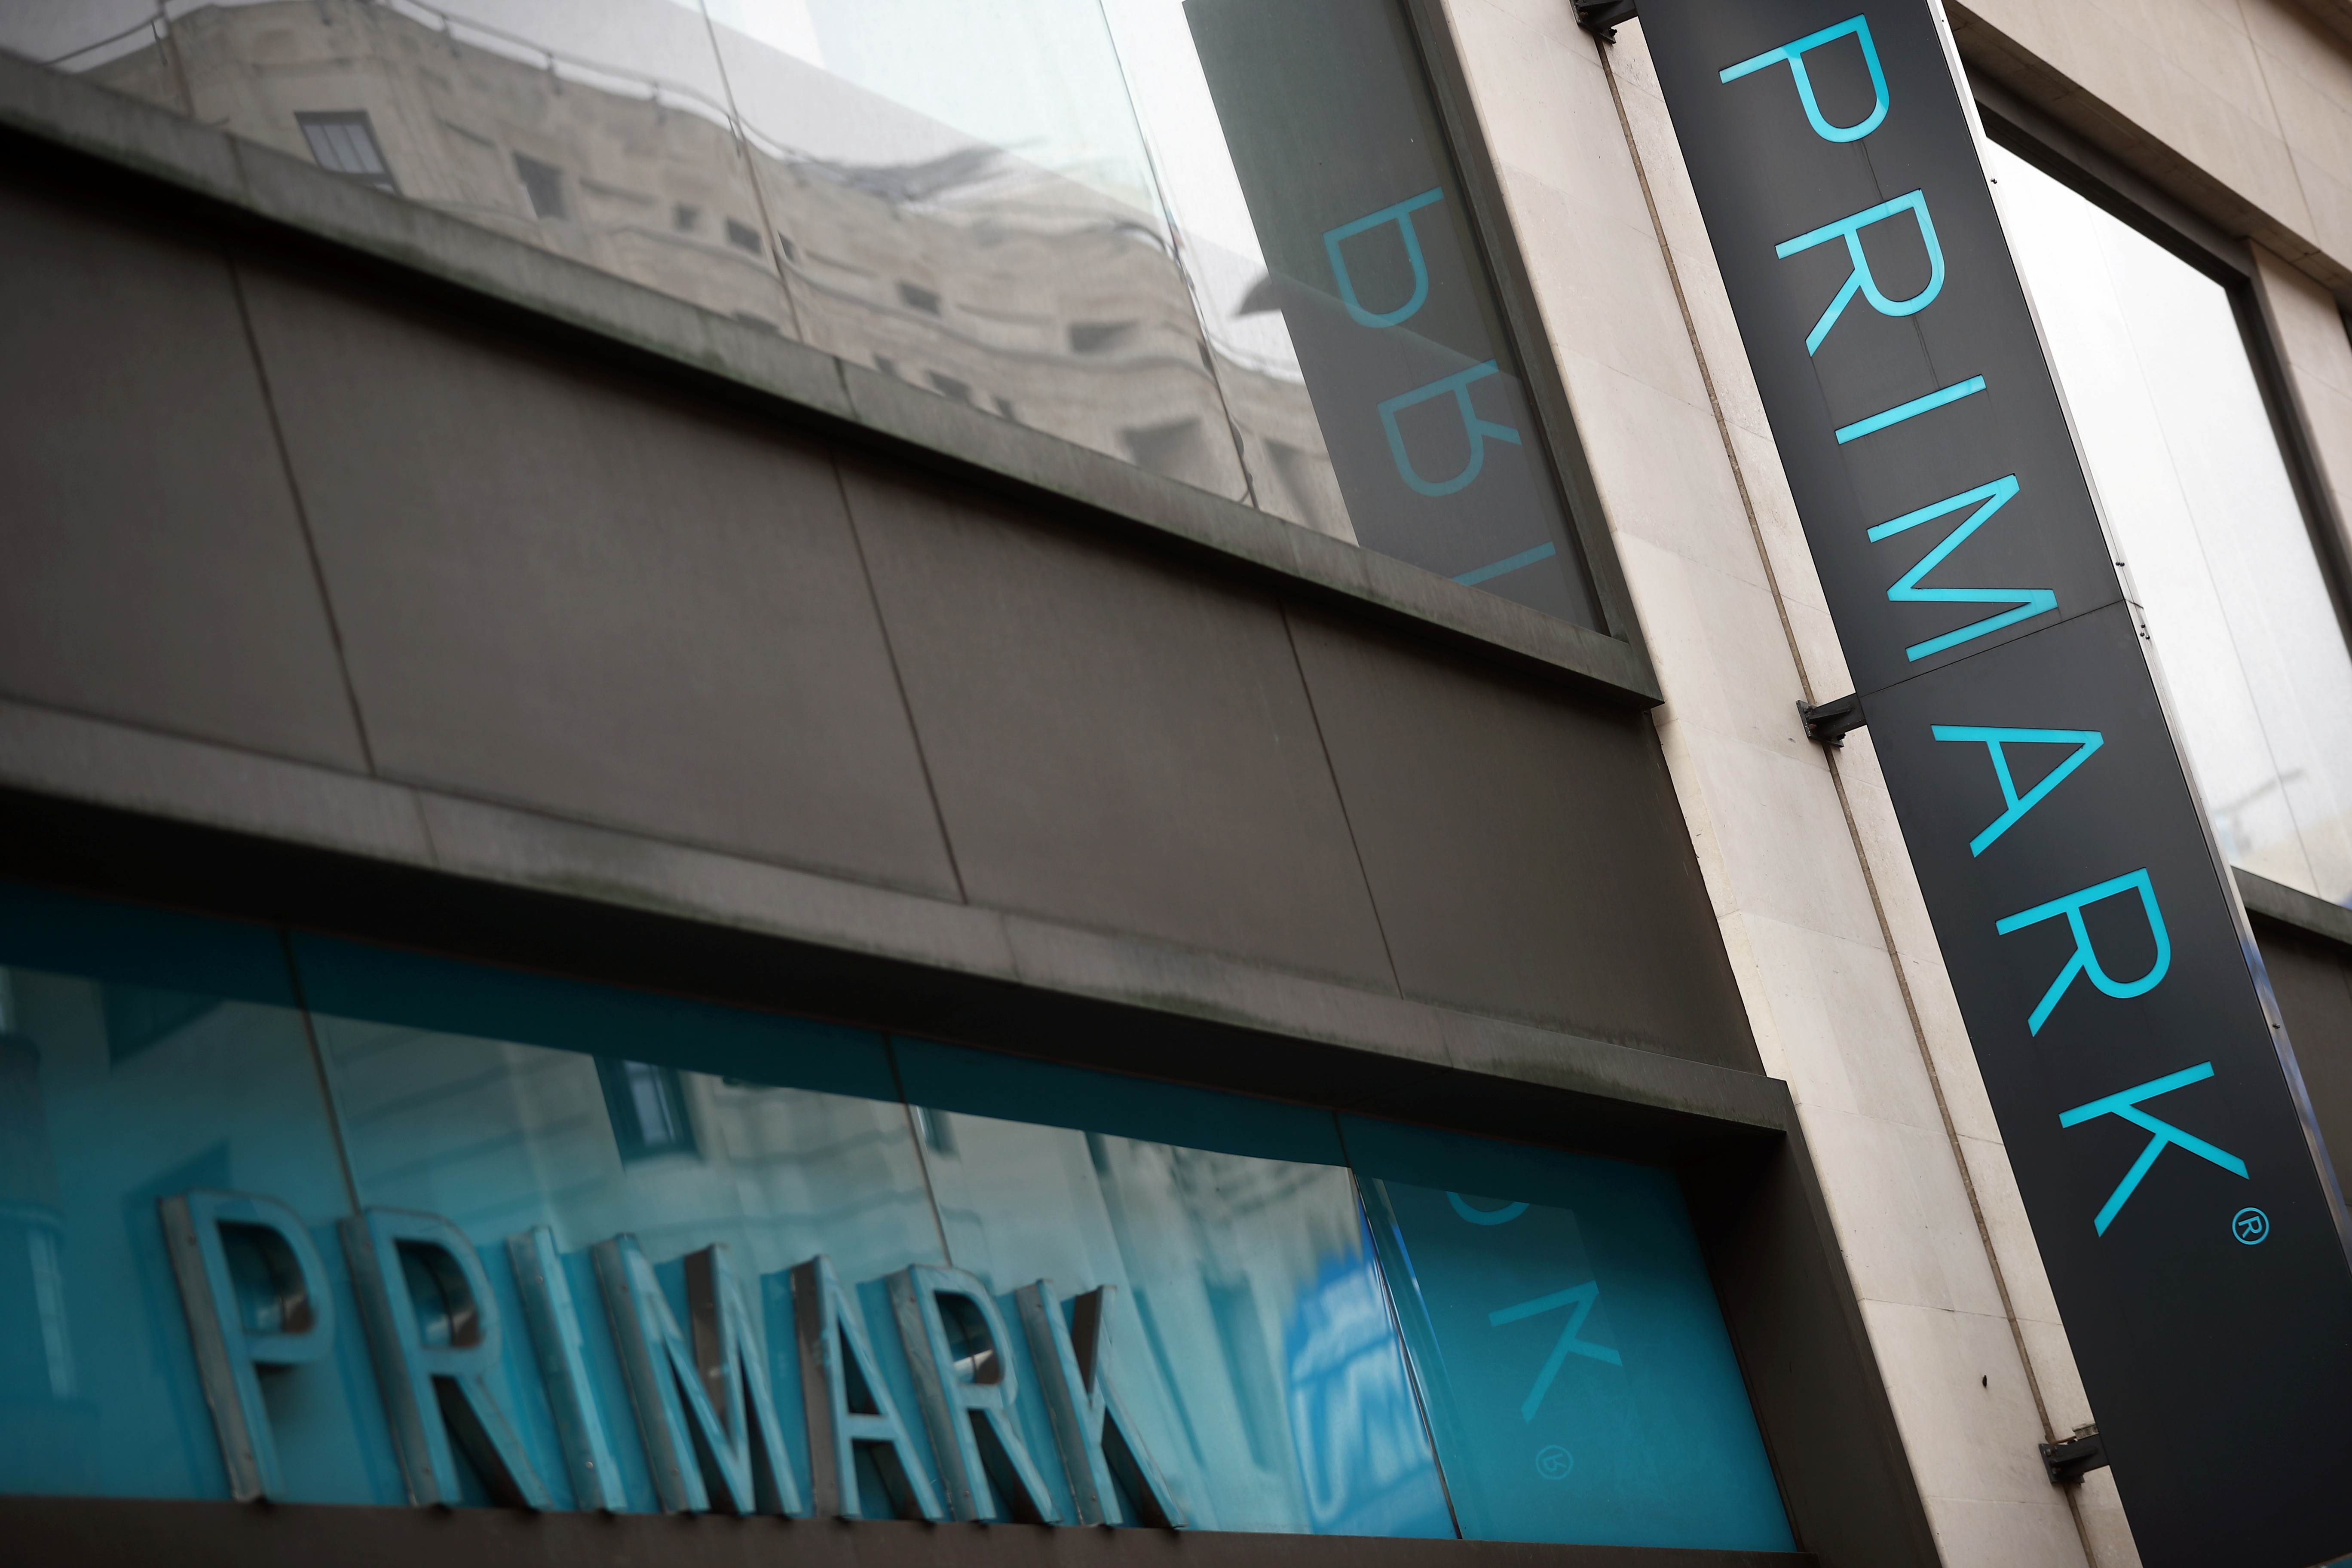 Signage is displayed outside a Primark store at the Oxford Street, in London